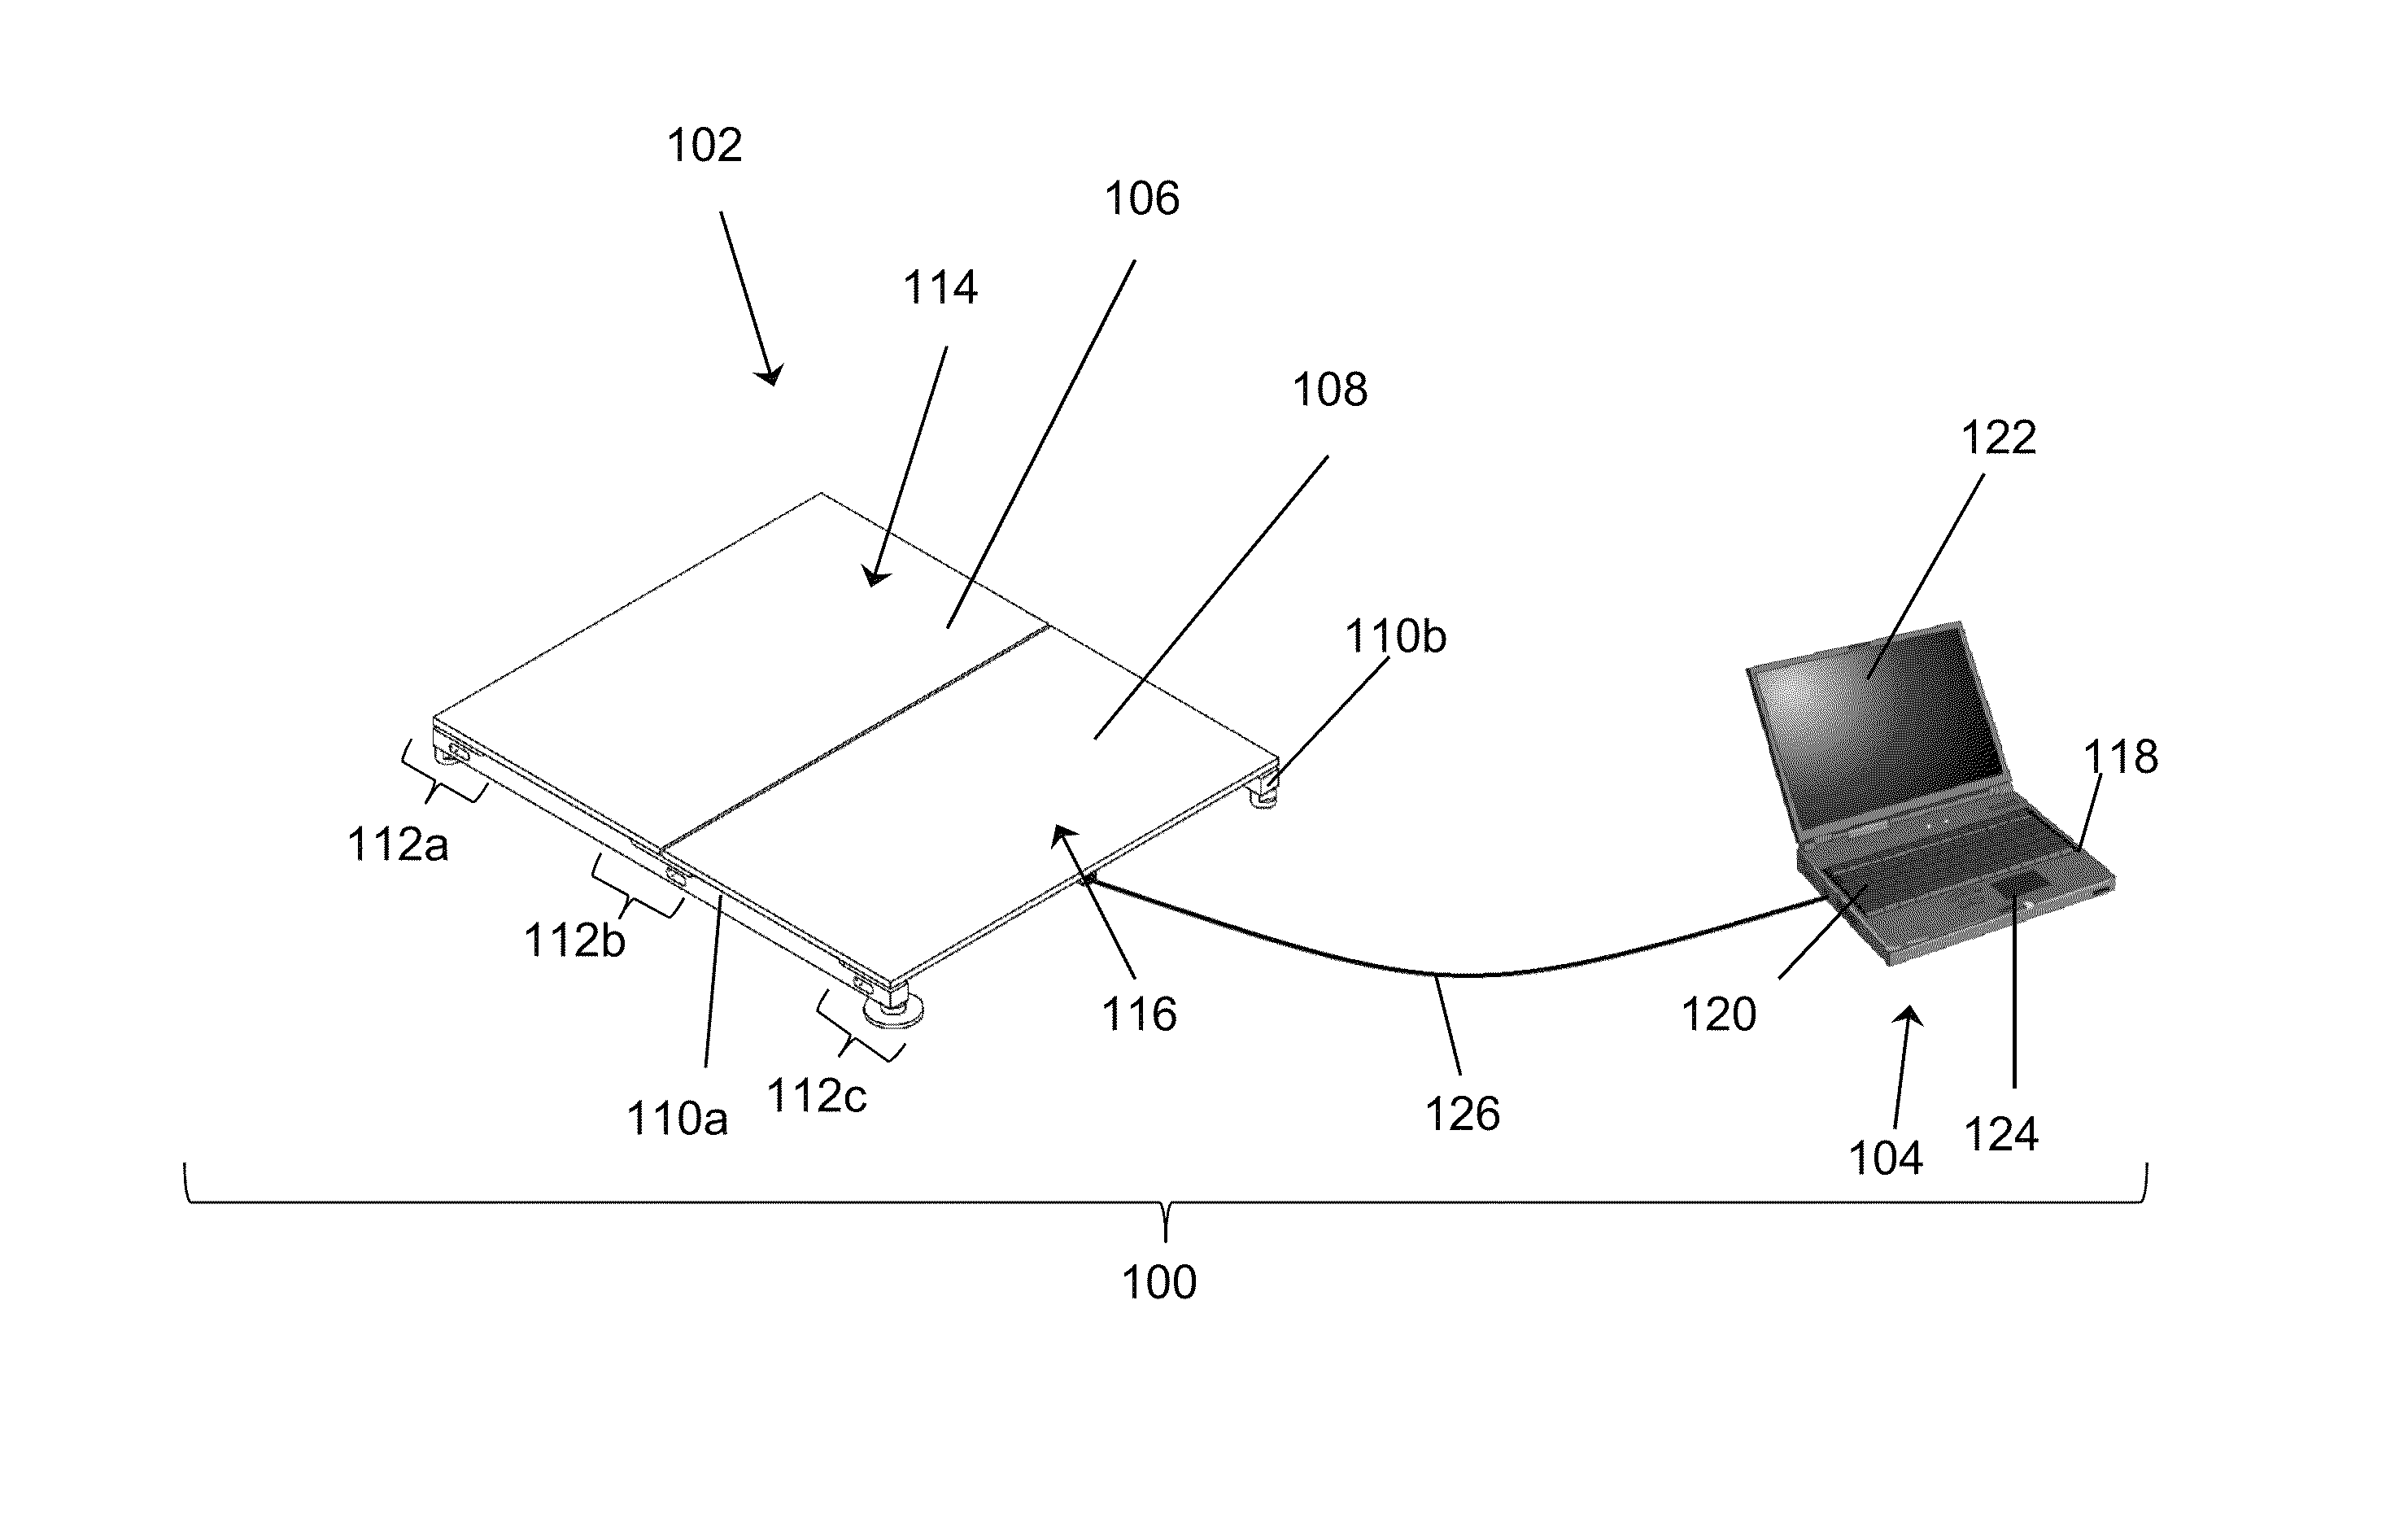 Force measurement system having a plurality of measurement surfaces